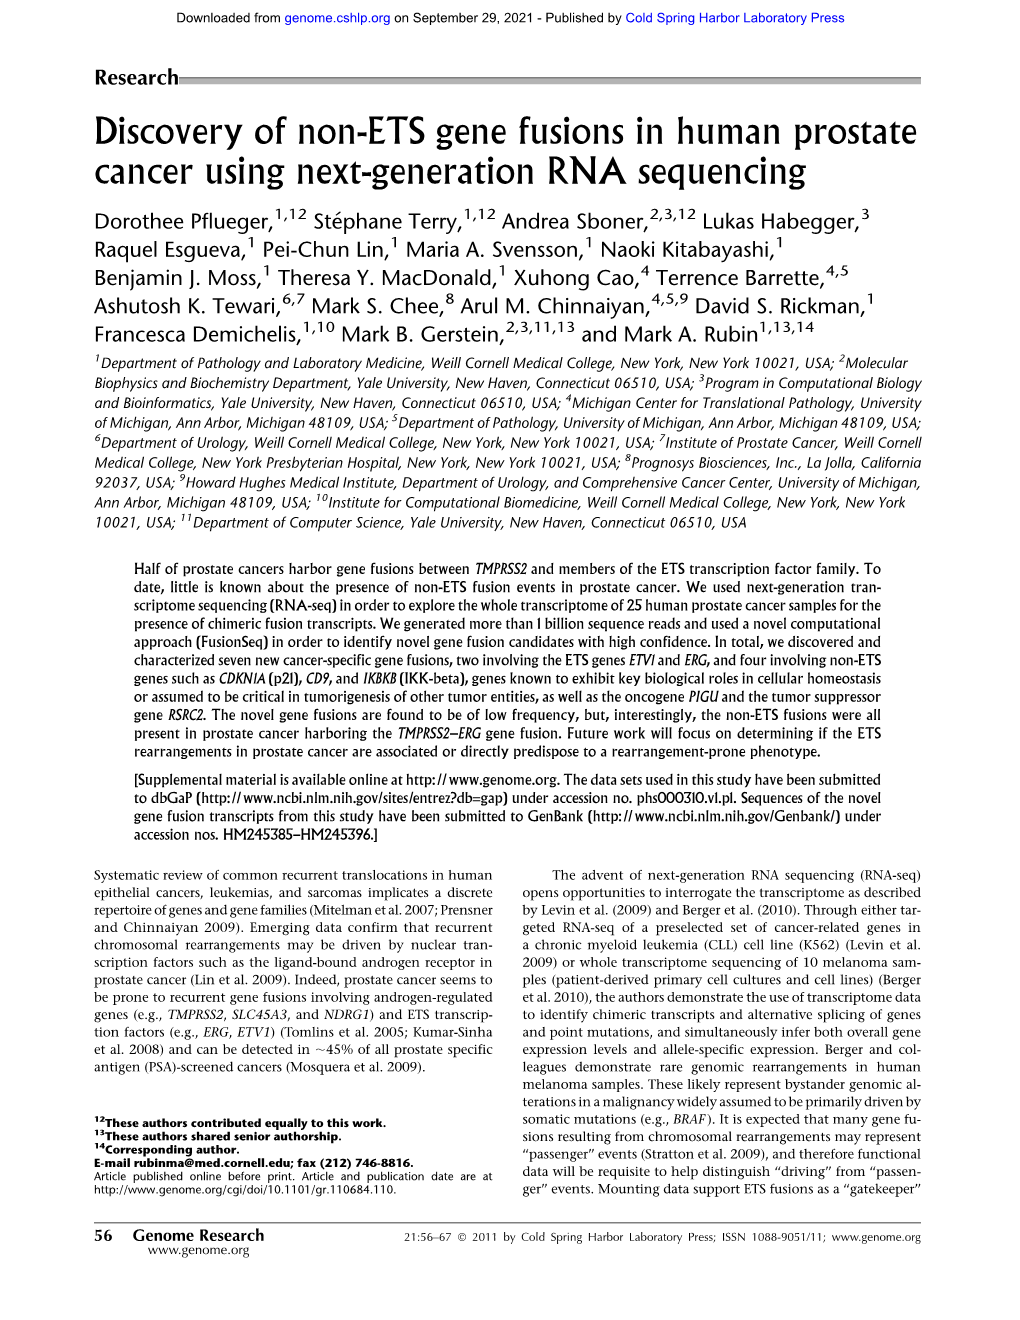 Discovery of Non-ETS Gene Fusions in Human Prostate Cancer Using Next-Generation RNA Sequencing